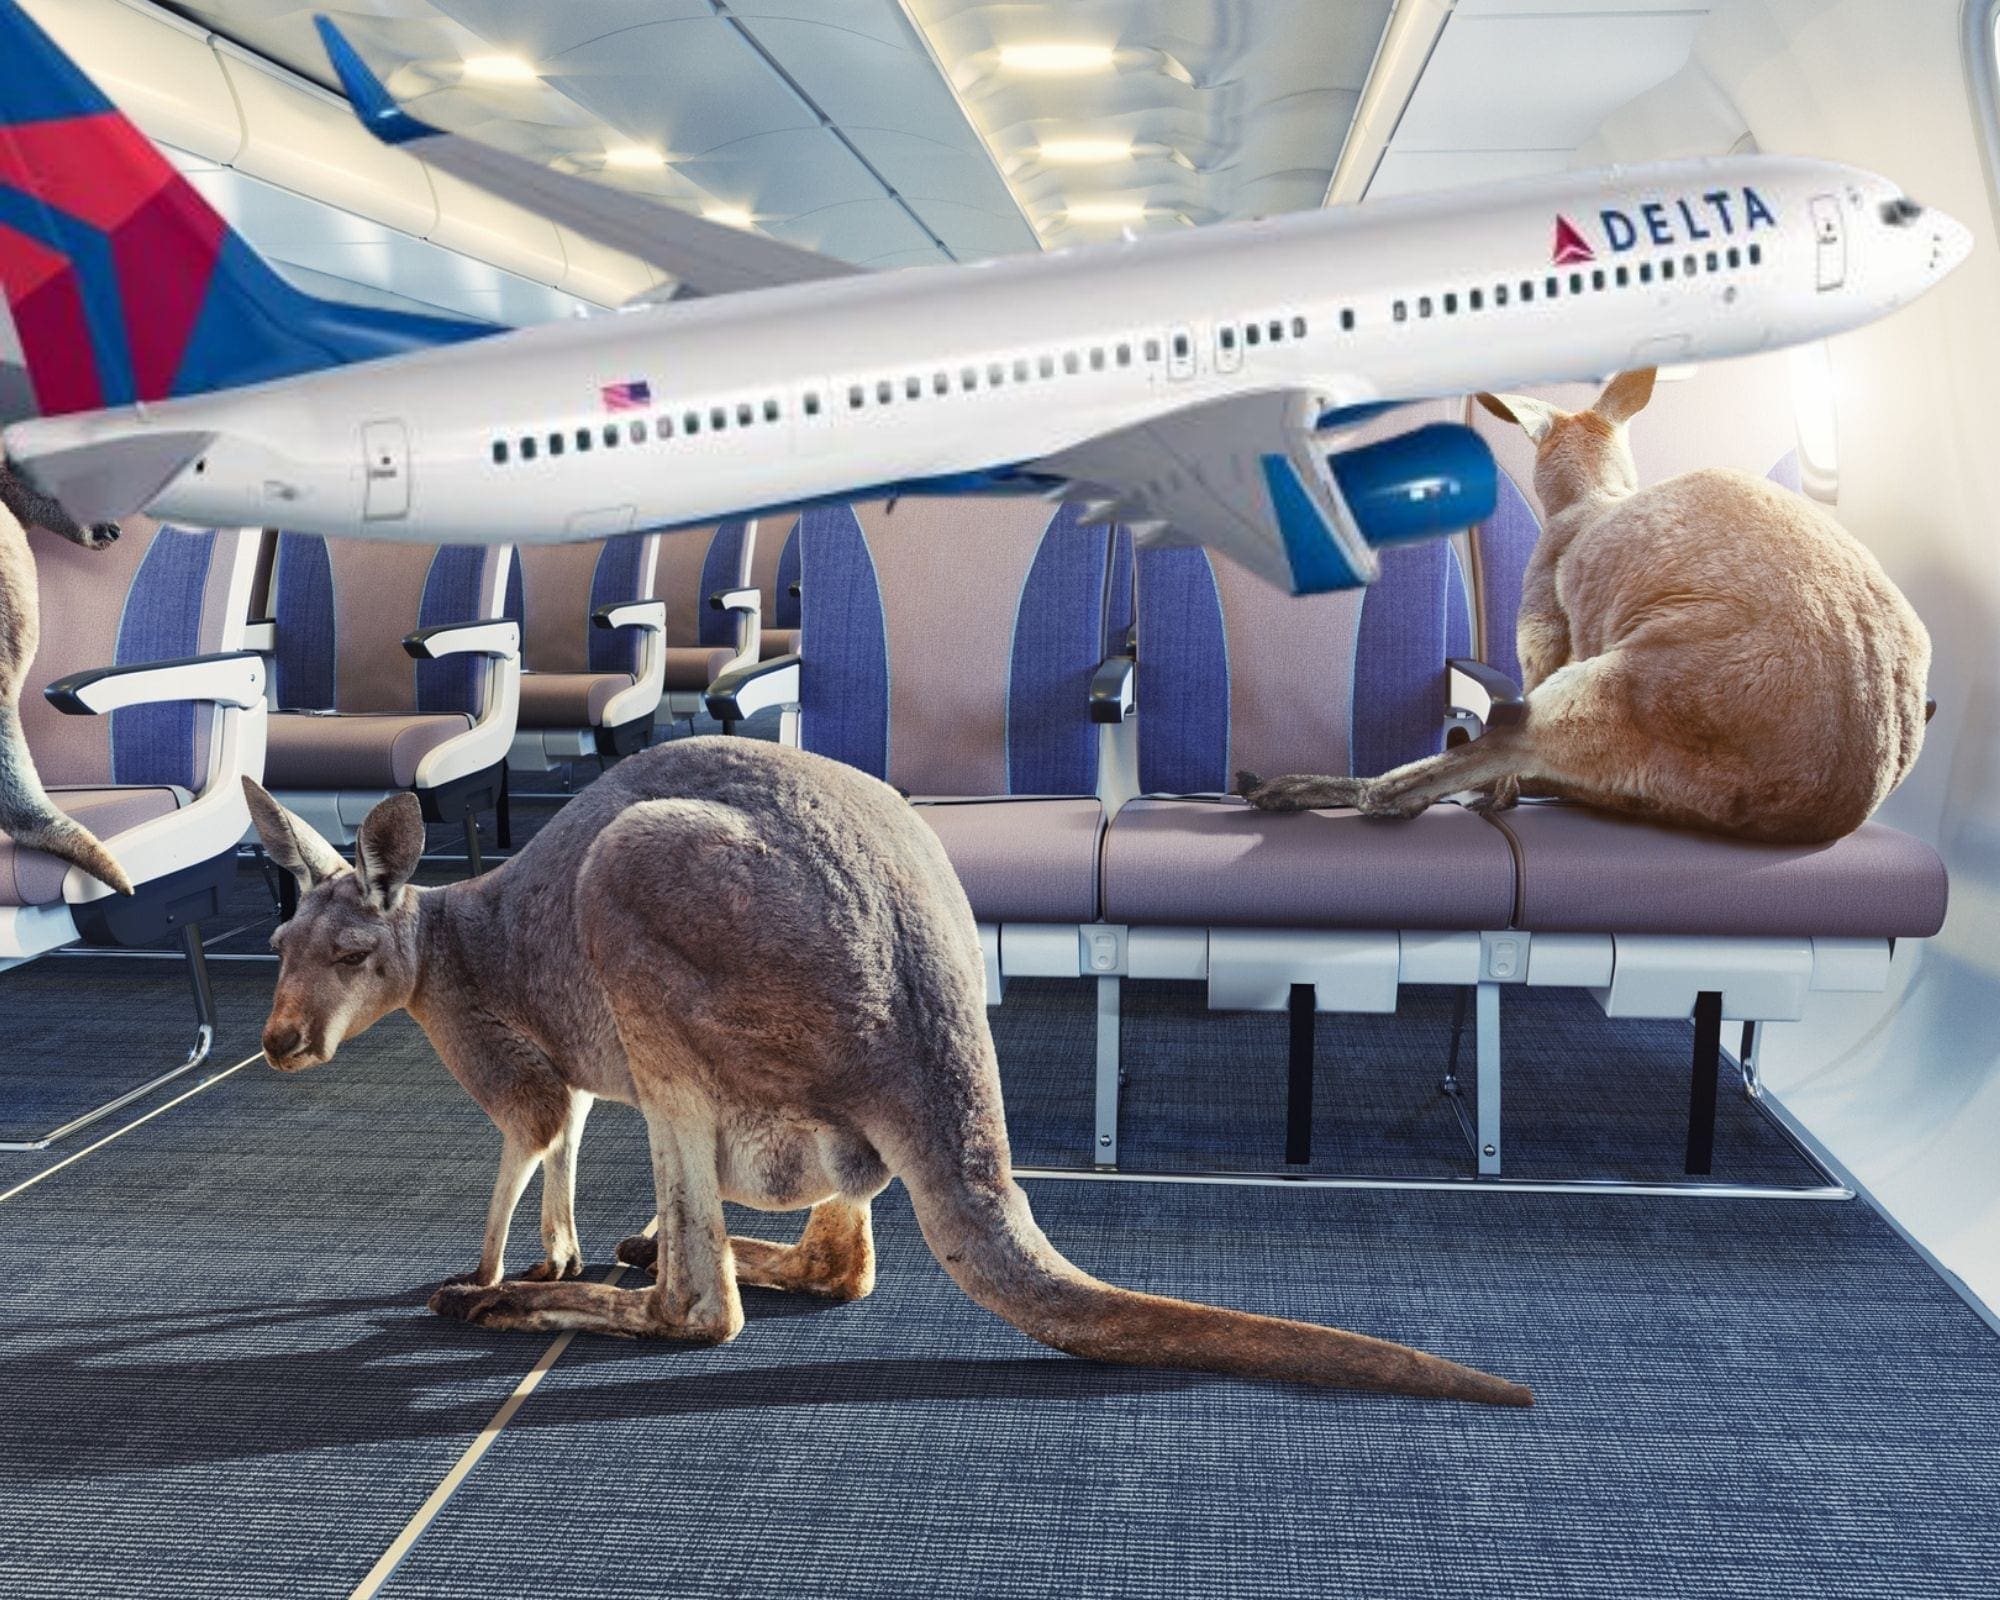 U S Airlines Bid Good Riddance To Emotional Support Animals The Canine Review